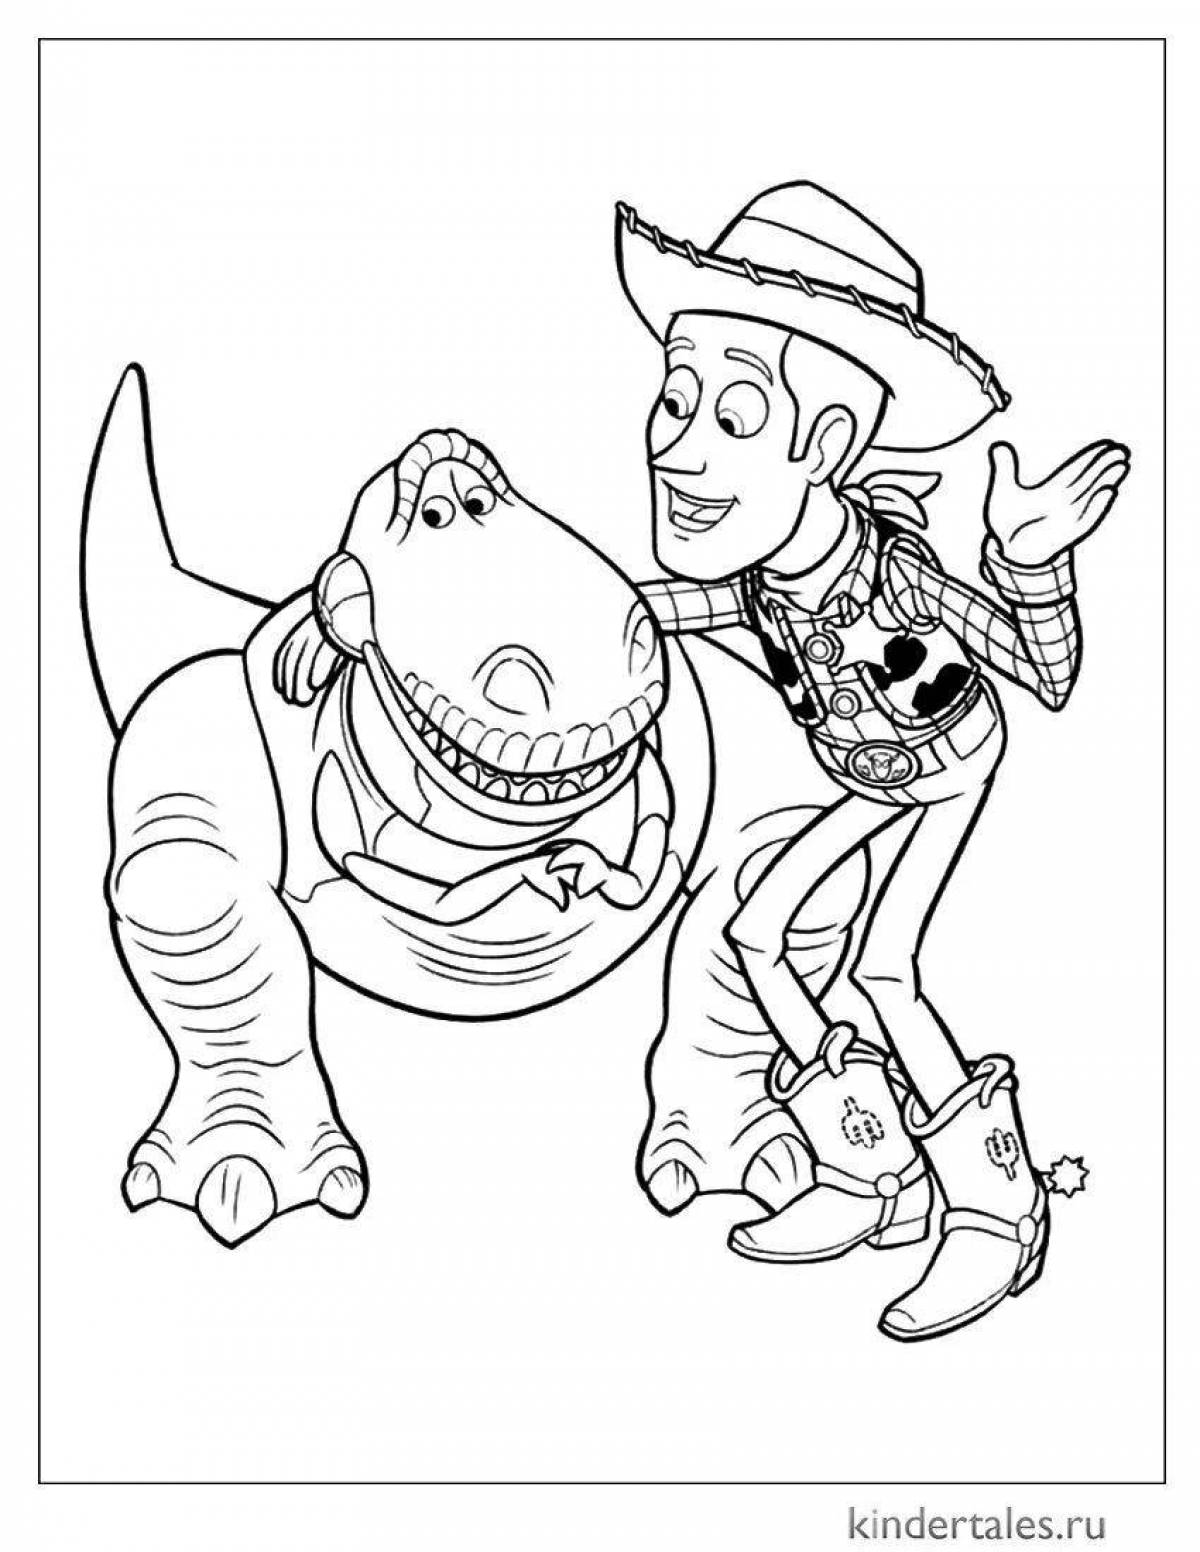 Coloring book exquisite sheriff